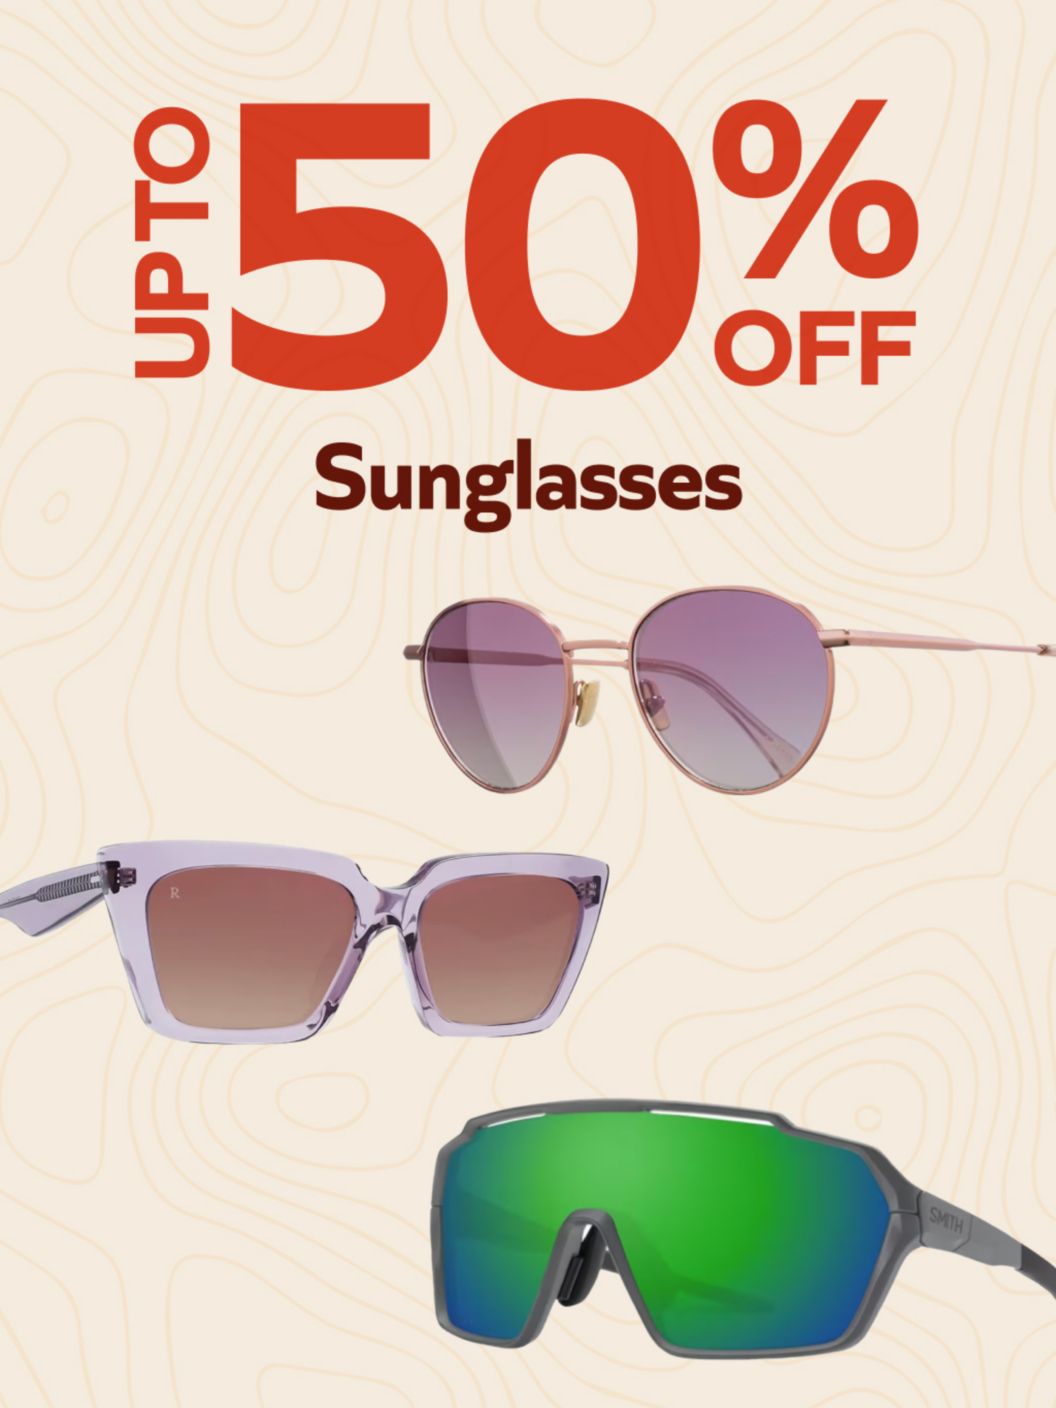 Sunglasses up to 50% off